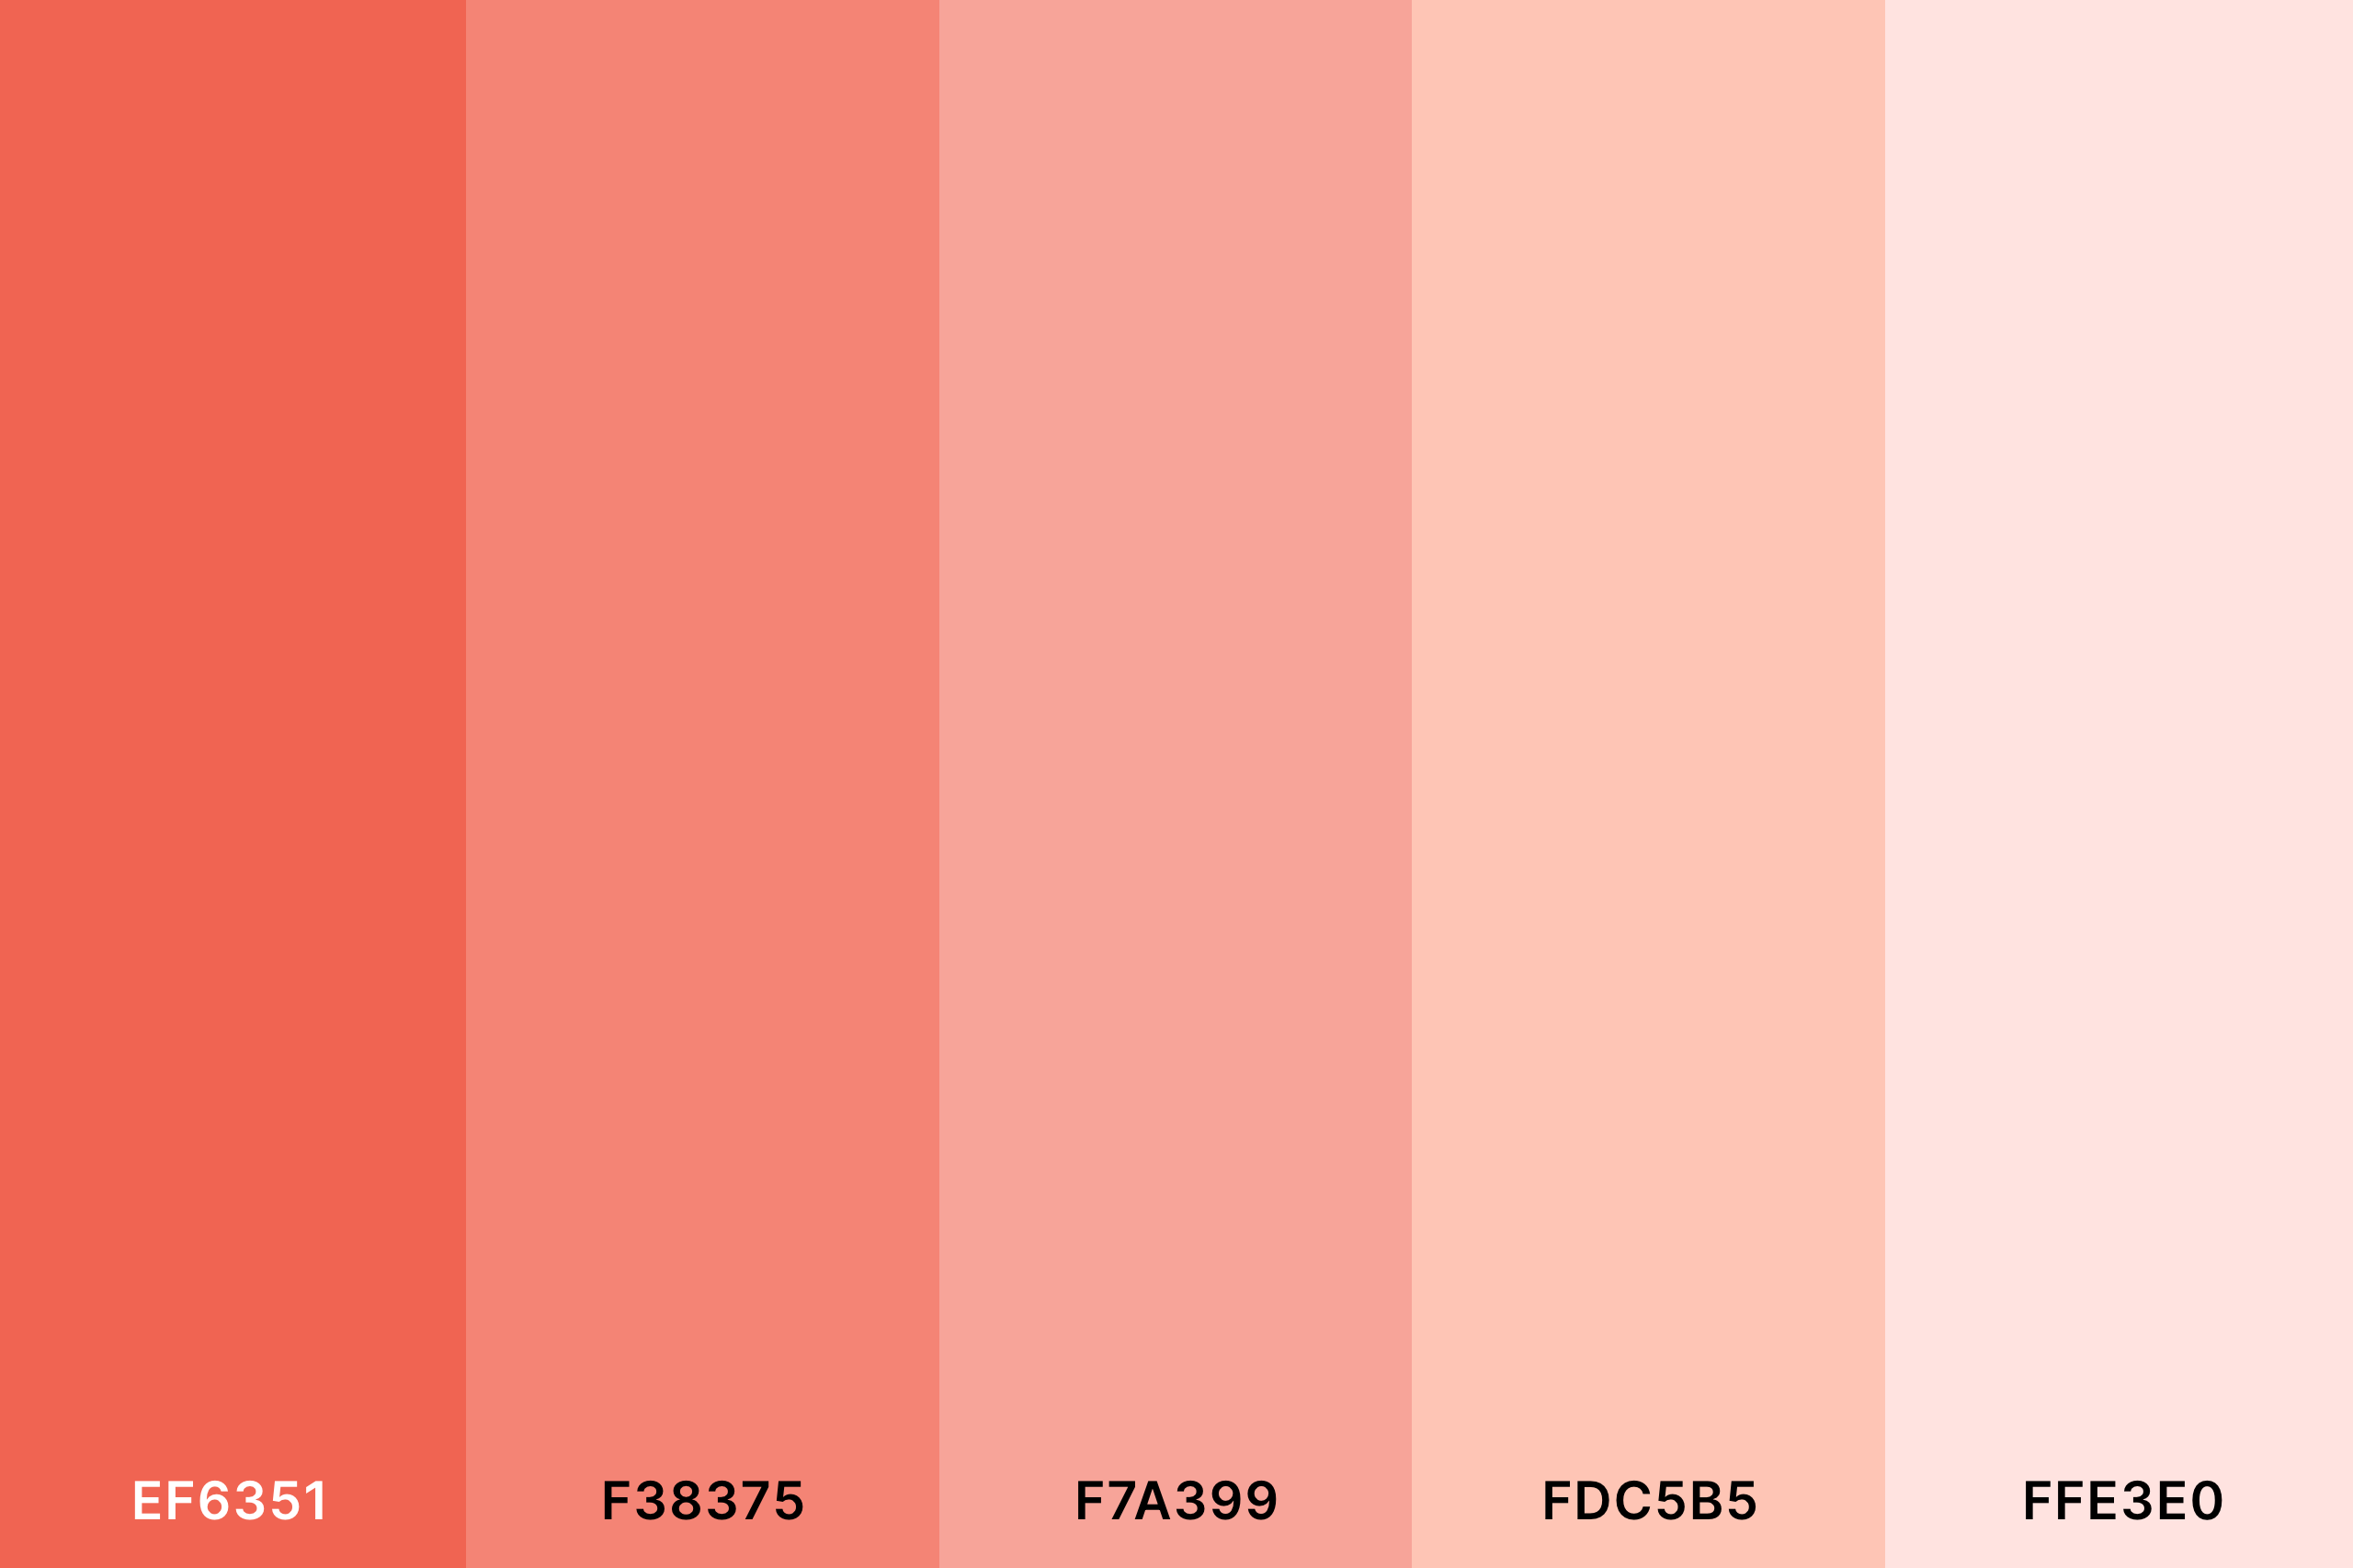 17 Latest Color Schemes with Hot Pink And Red Color tone